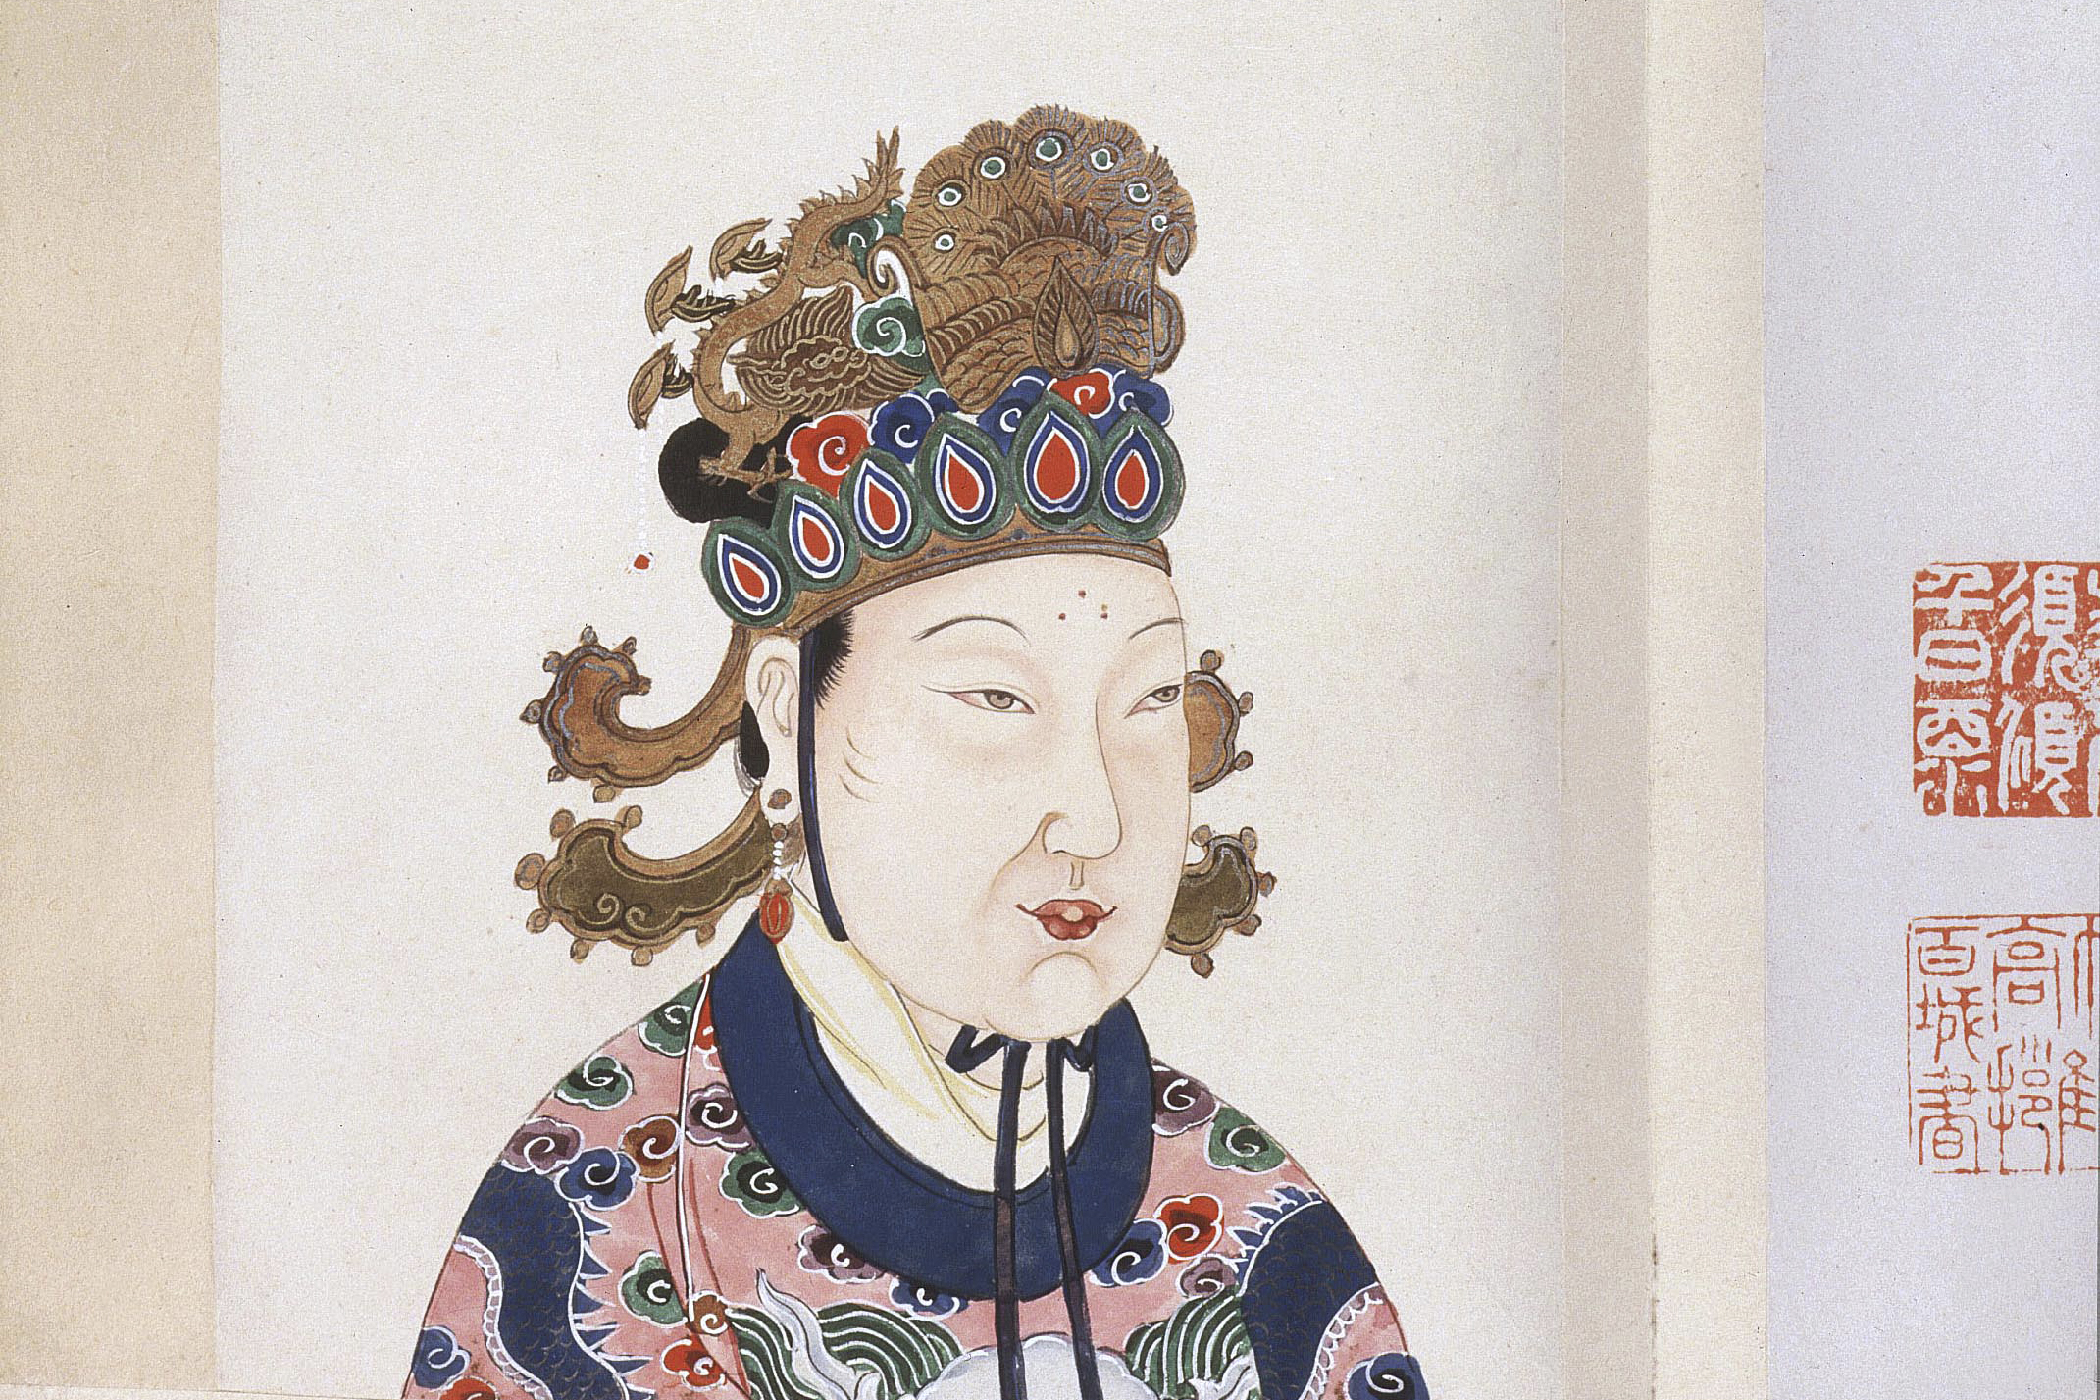 Empress Wu Zetian, first empress of China, 624-705 AD, imperial concubine until marriage to Emperor Gaozong, Tang dynasty, from Album of portraits of 86 Chinese emperors, with Chinese historical notes, 18th century.